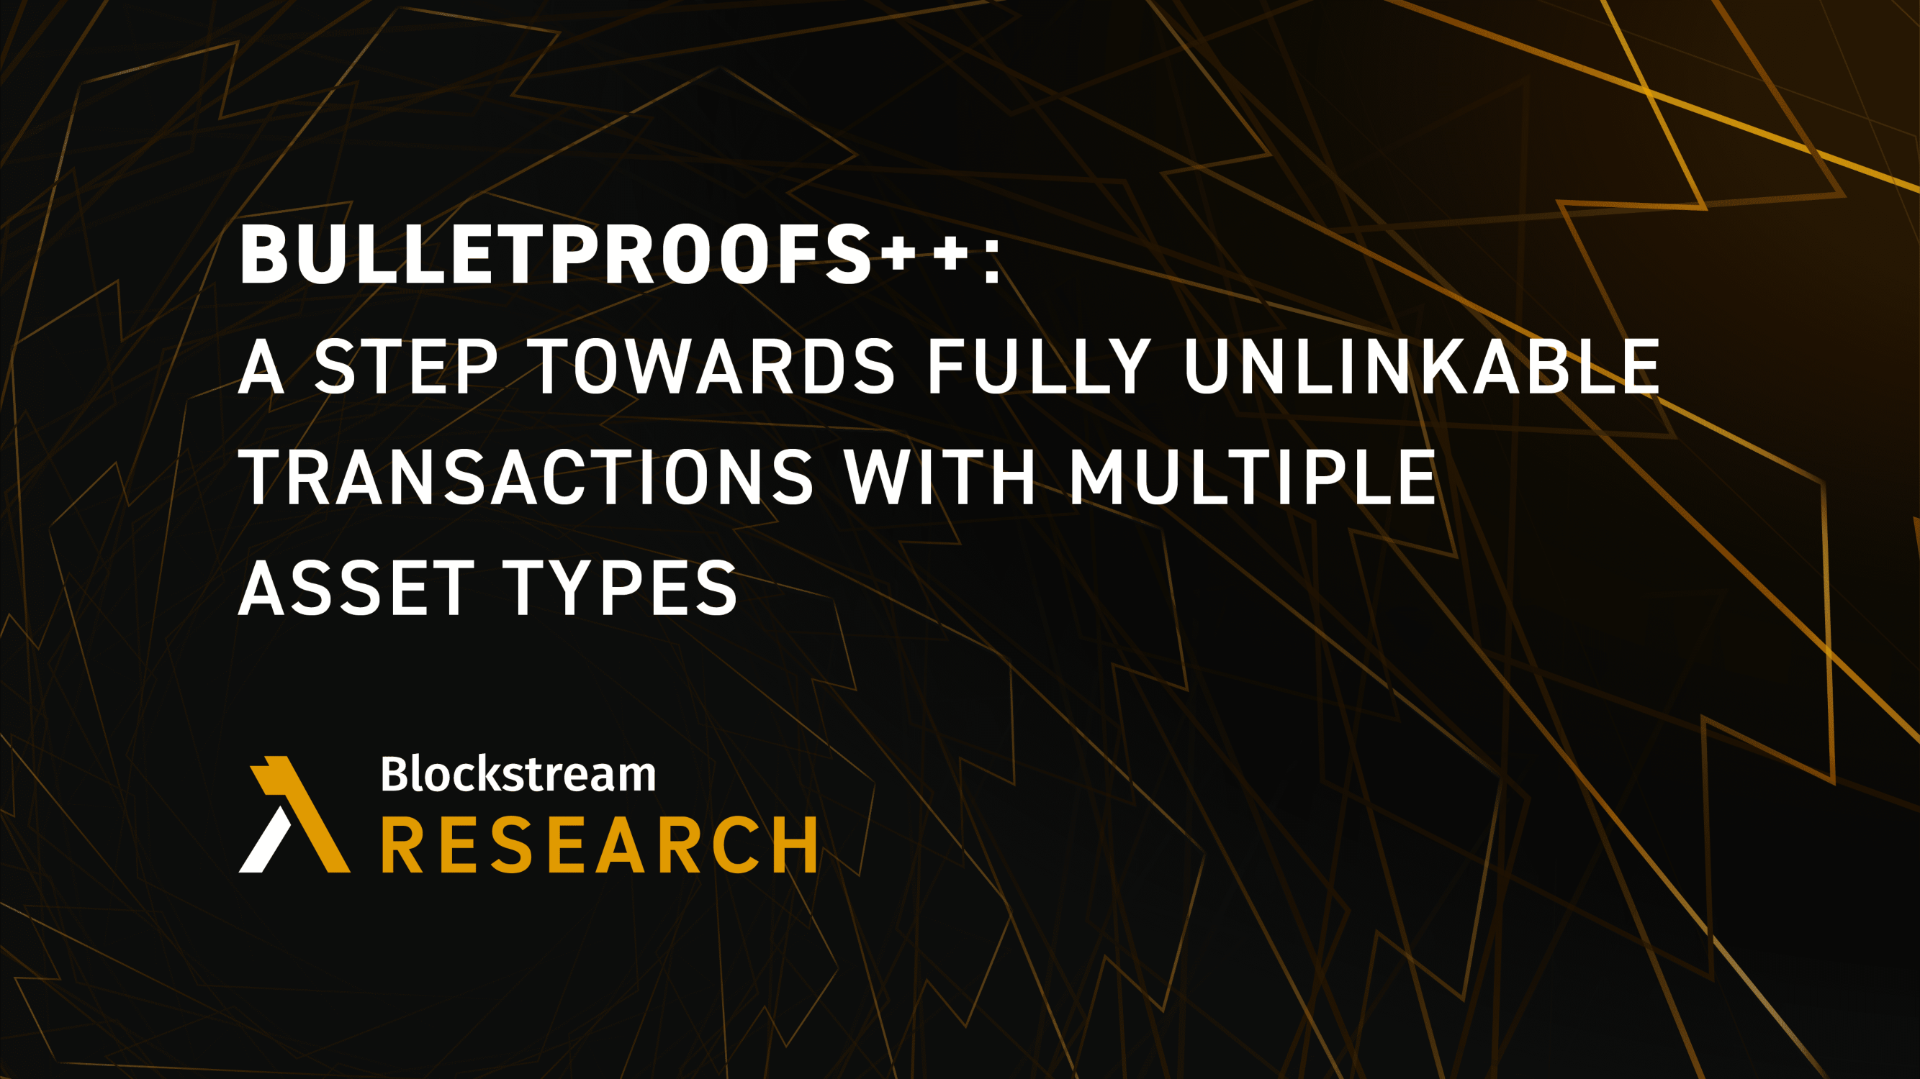 Bulletproofs++: A Step Towards Fully Unlinkable Transactions With Multiple Asset Types